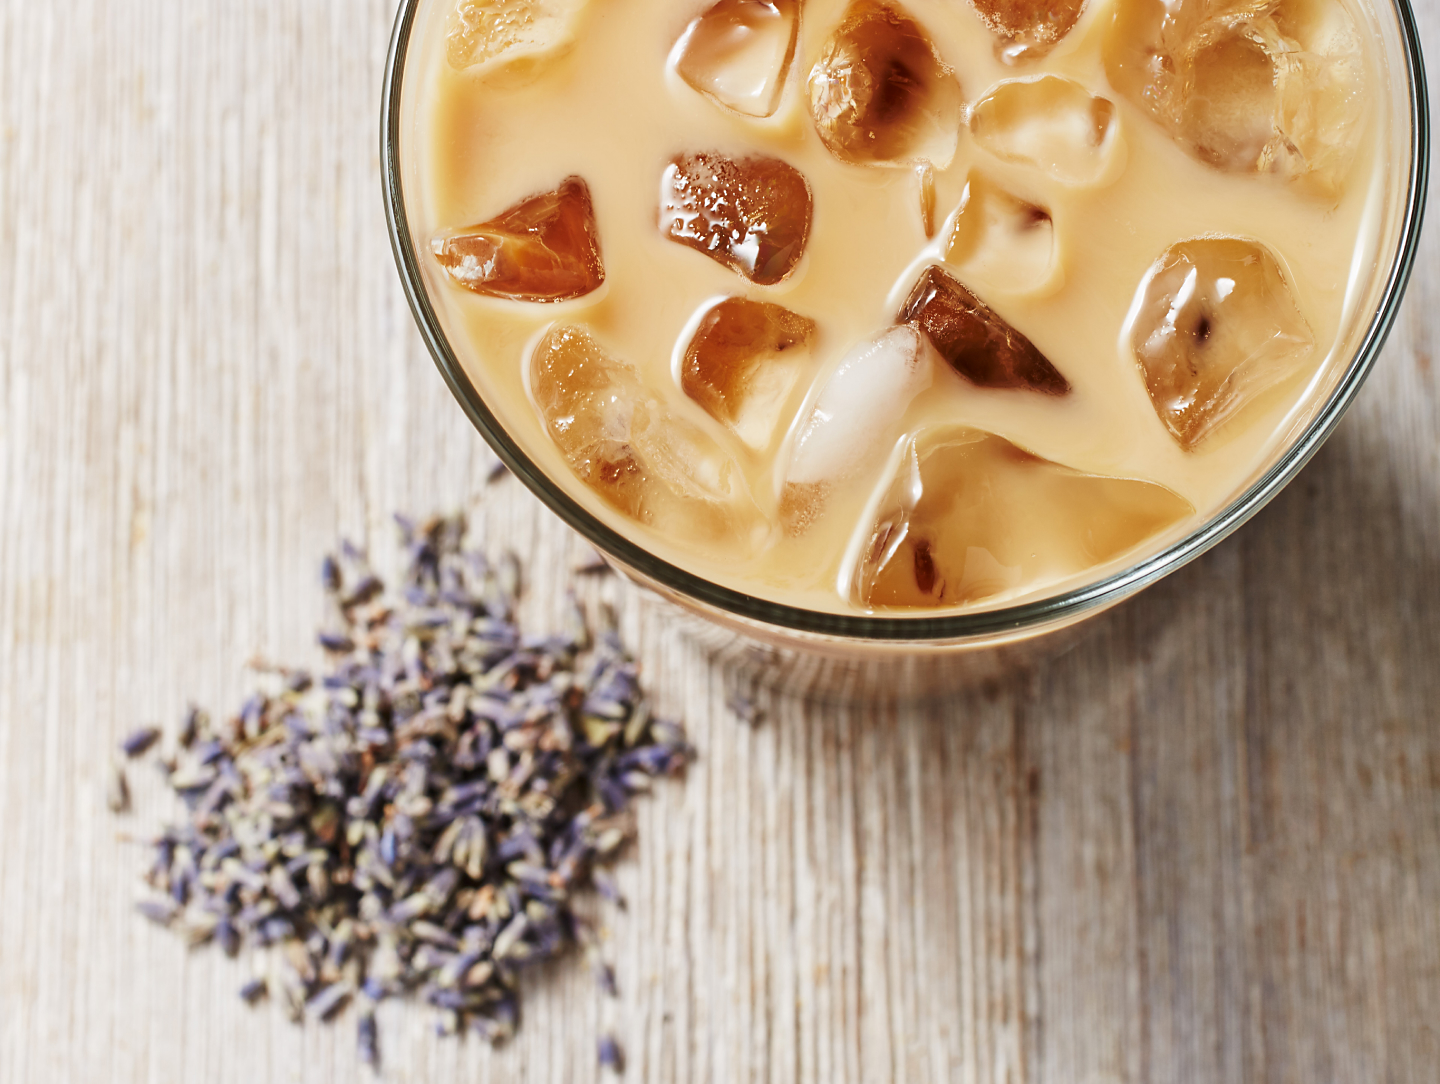  Iced coffee drink with fresh lavender buds on countertop